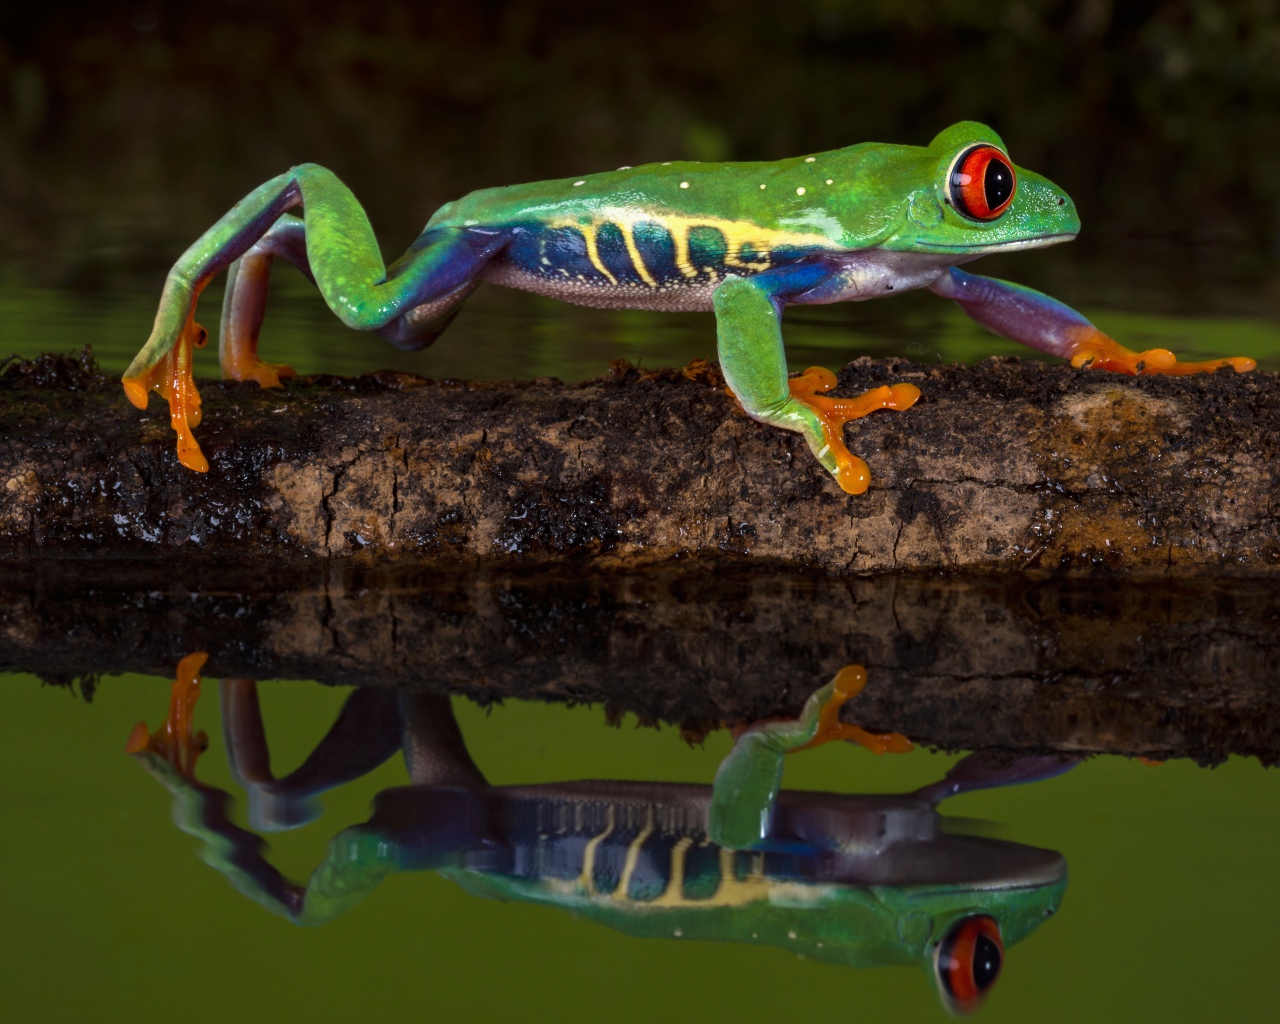 Red-eyed tree frog on a branch in the water